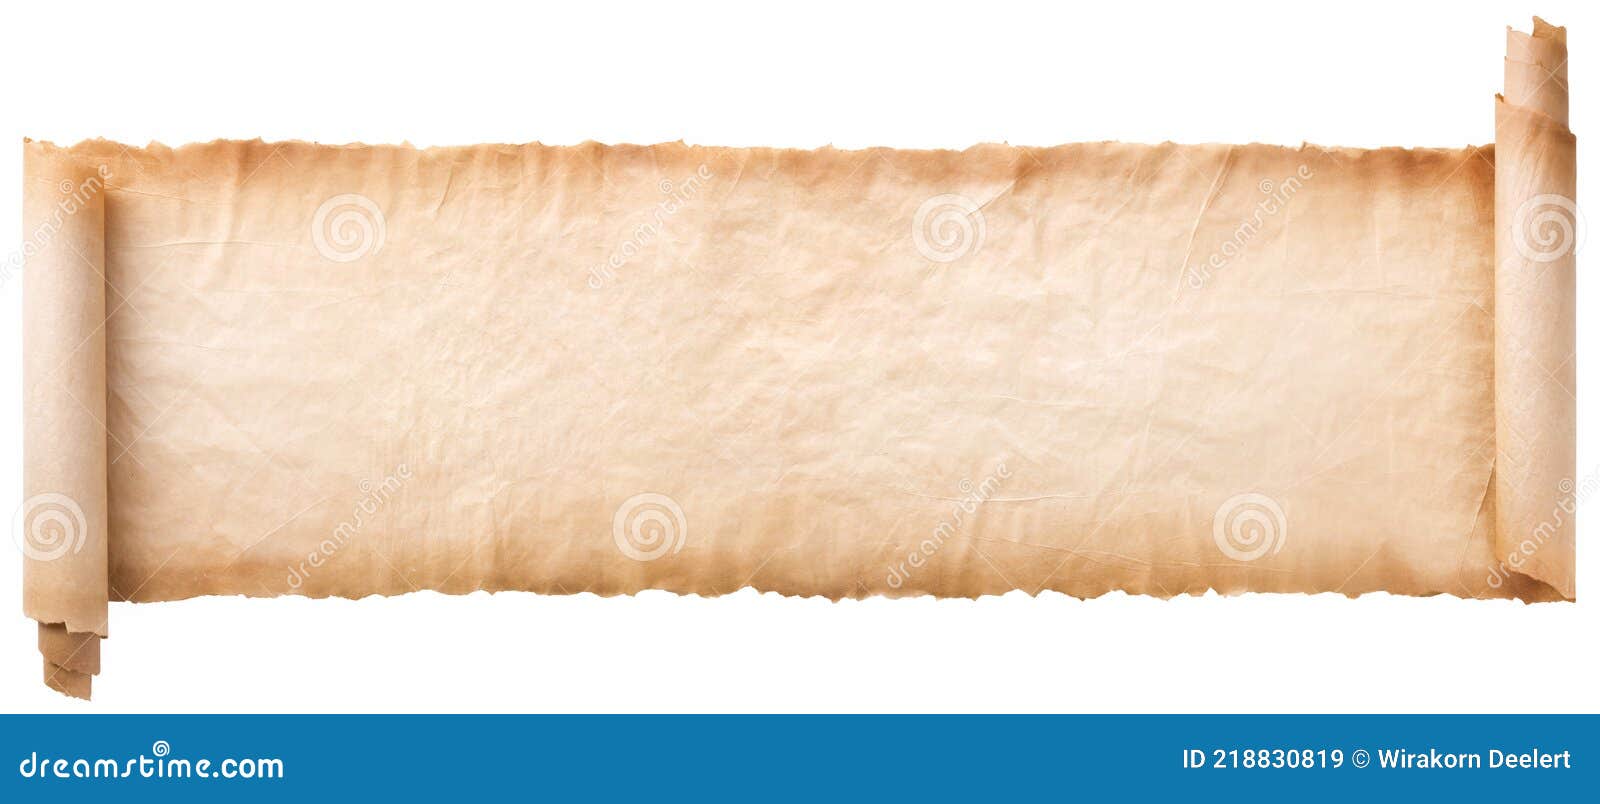 old parchment paper scroll sheet vintage aged or texture